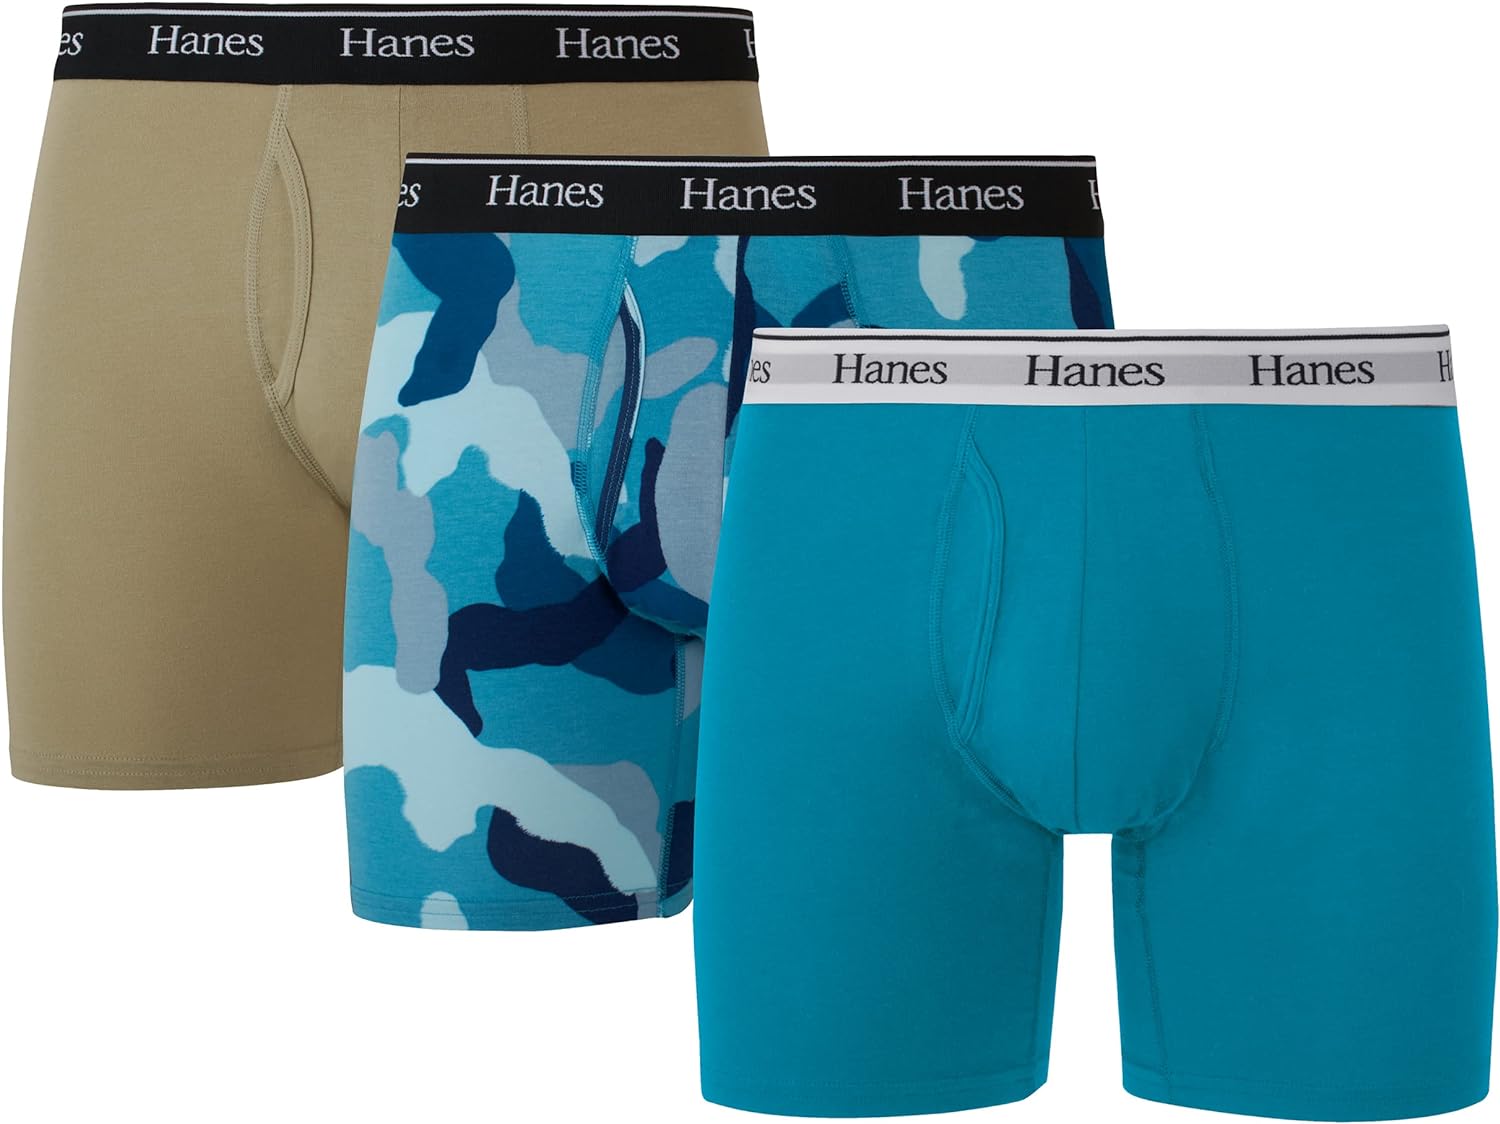 Red White and Blue Rare Hanes Briefs Collection Mystery Pair -  Canada